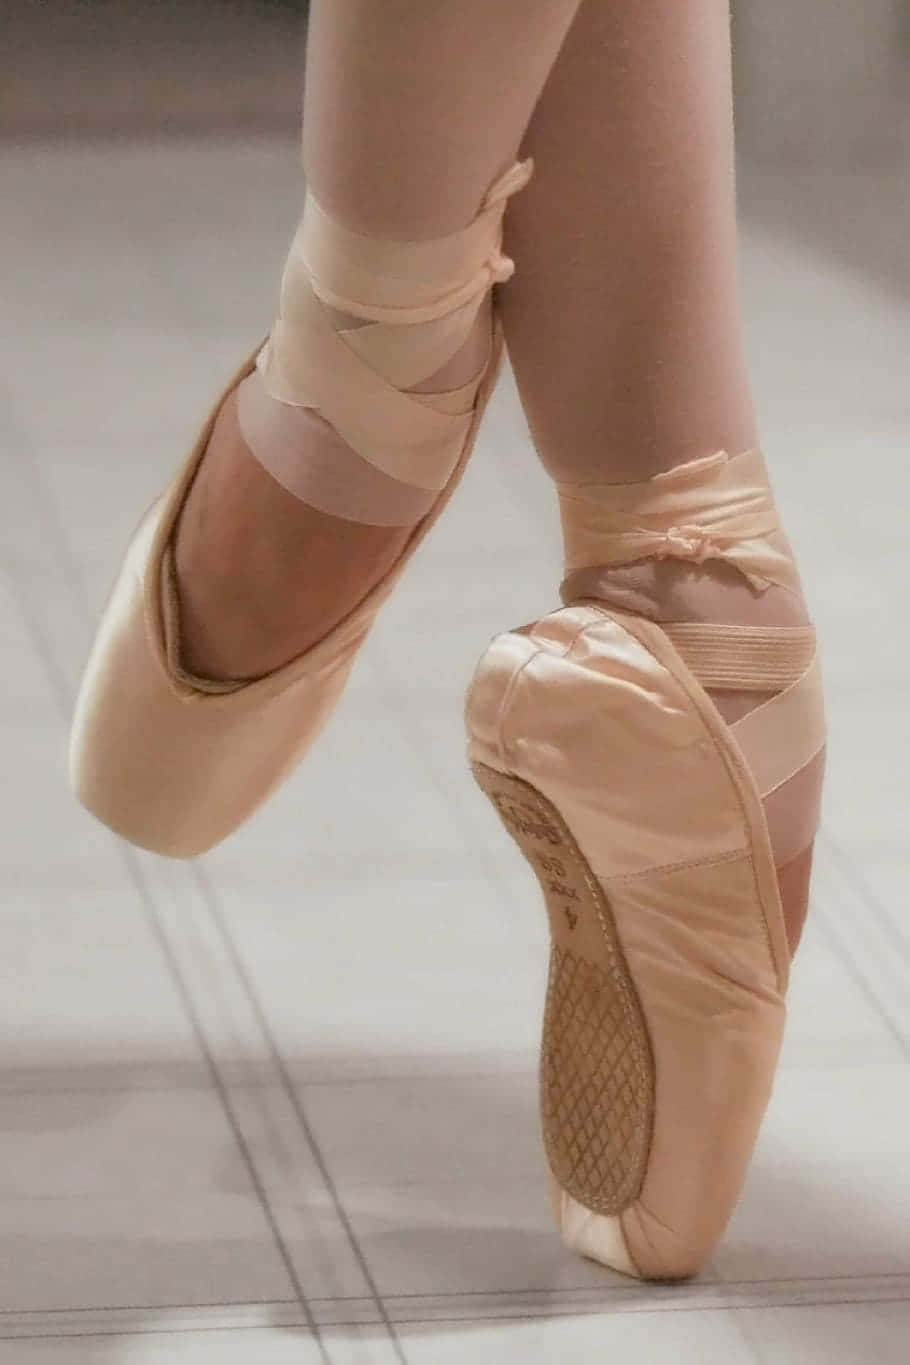 Pointe Shoes Tiny Feet Wallpaper